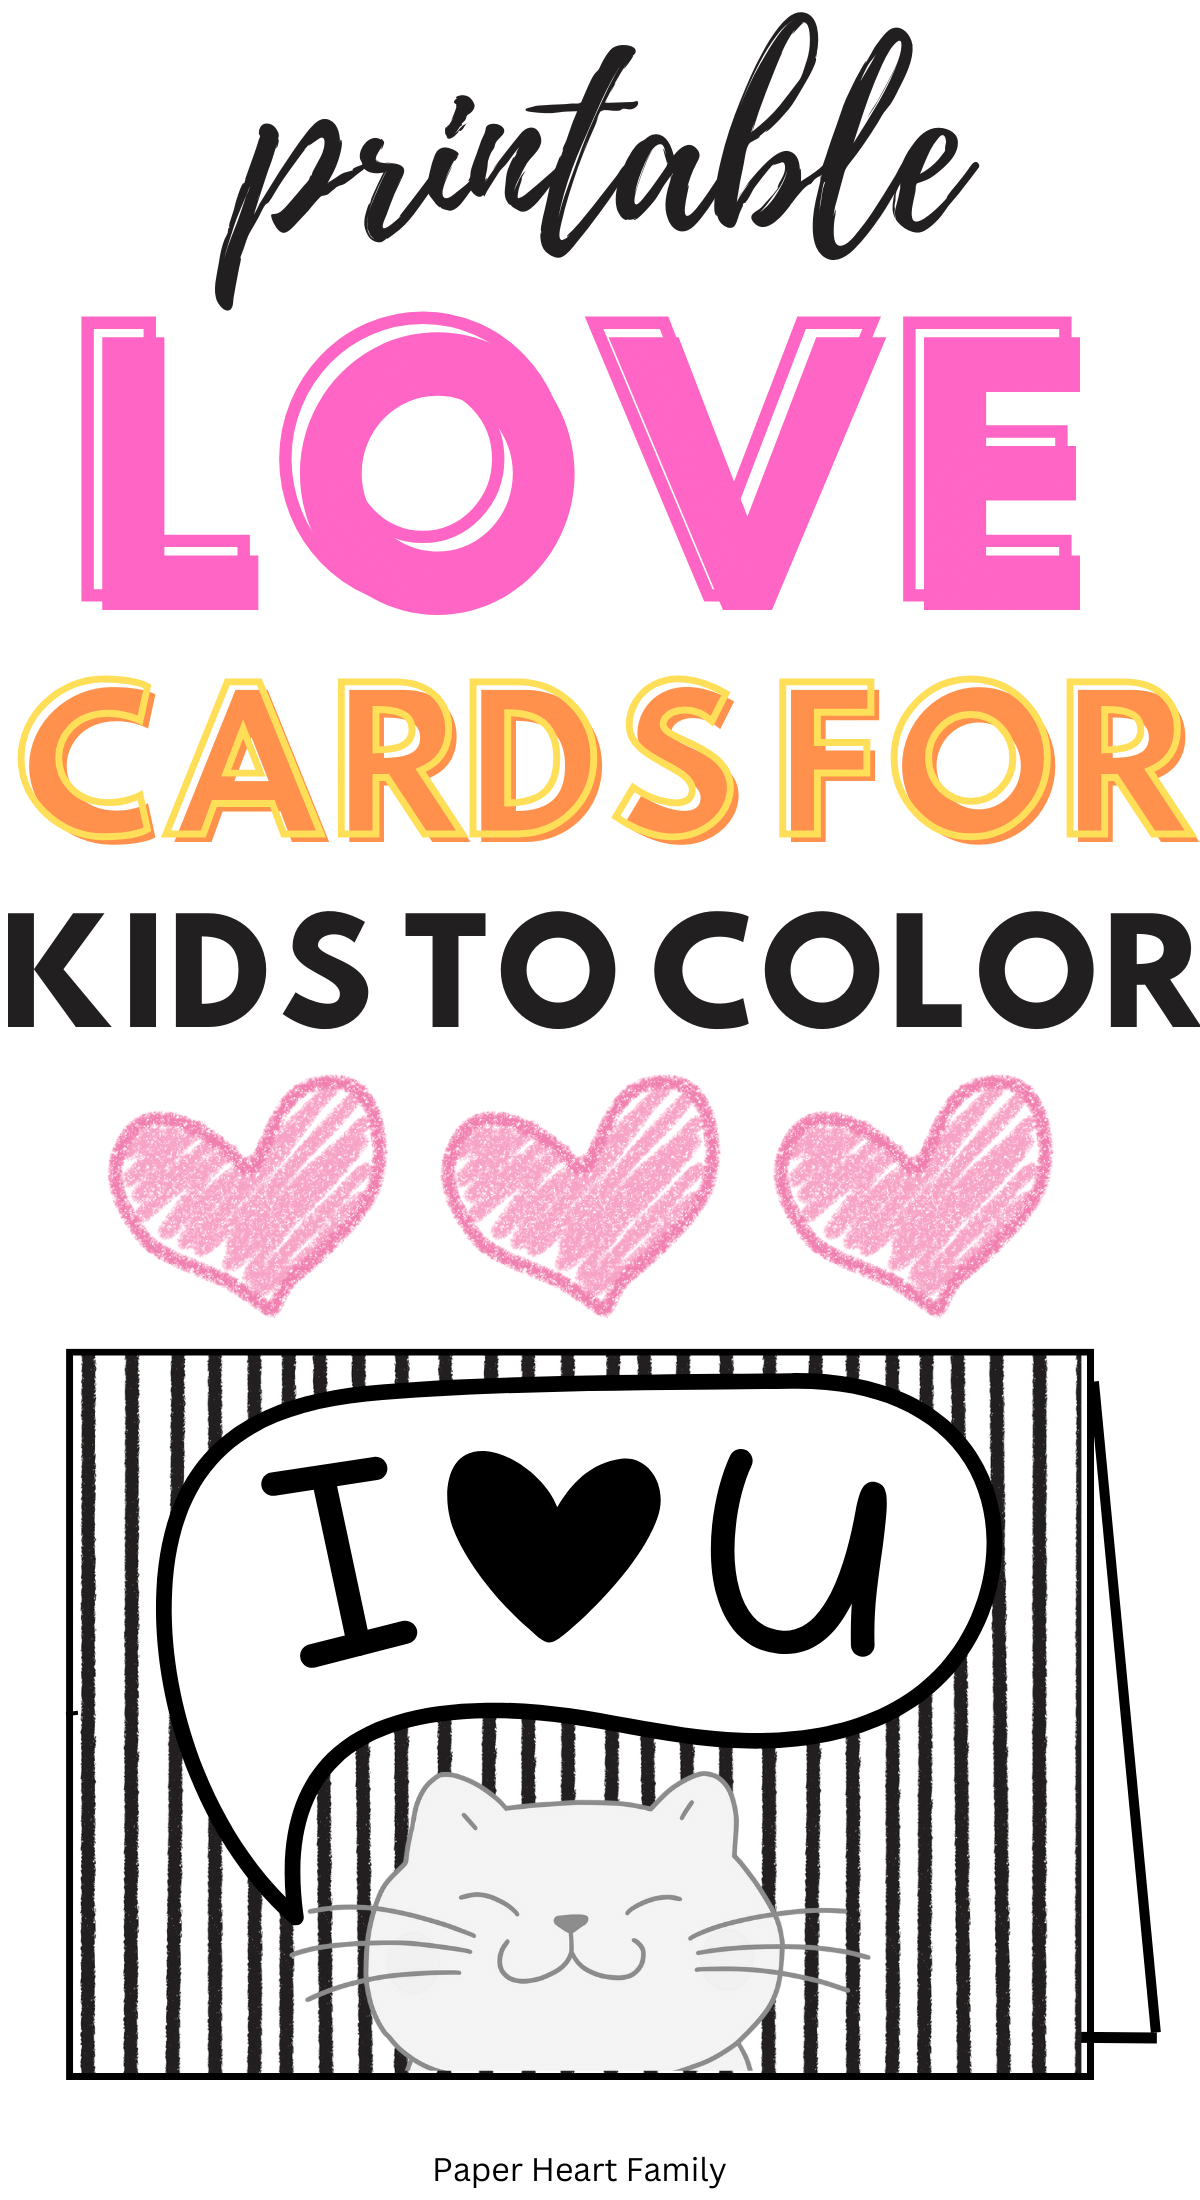 Card with cat and vertical stripes to color that says I heart you.